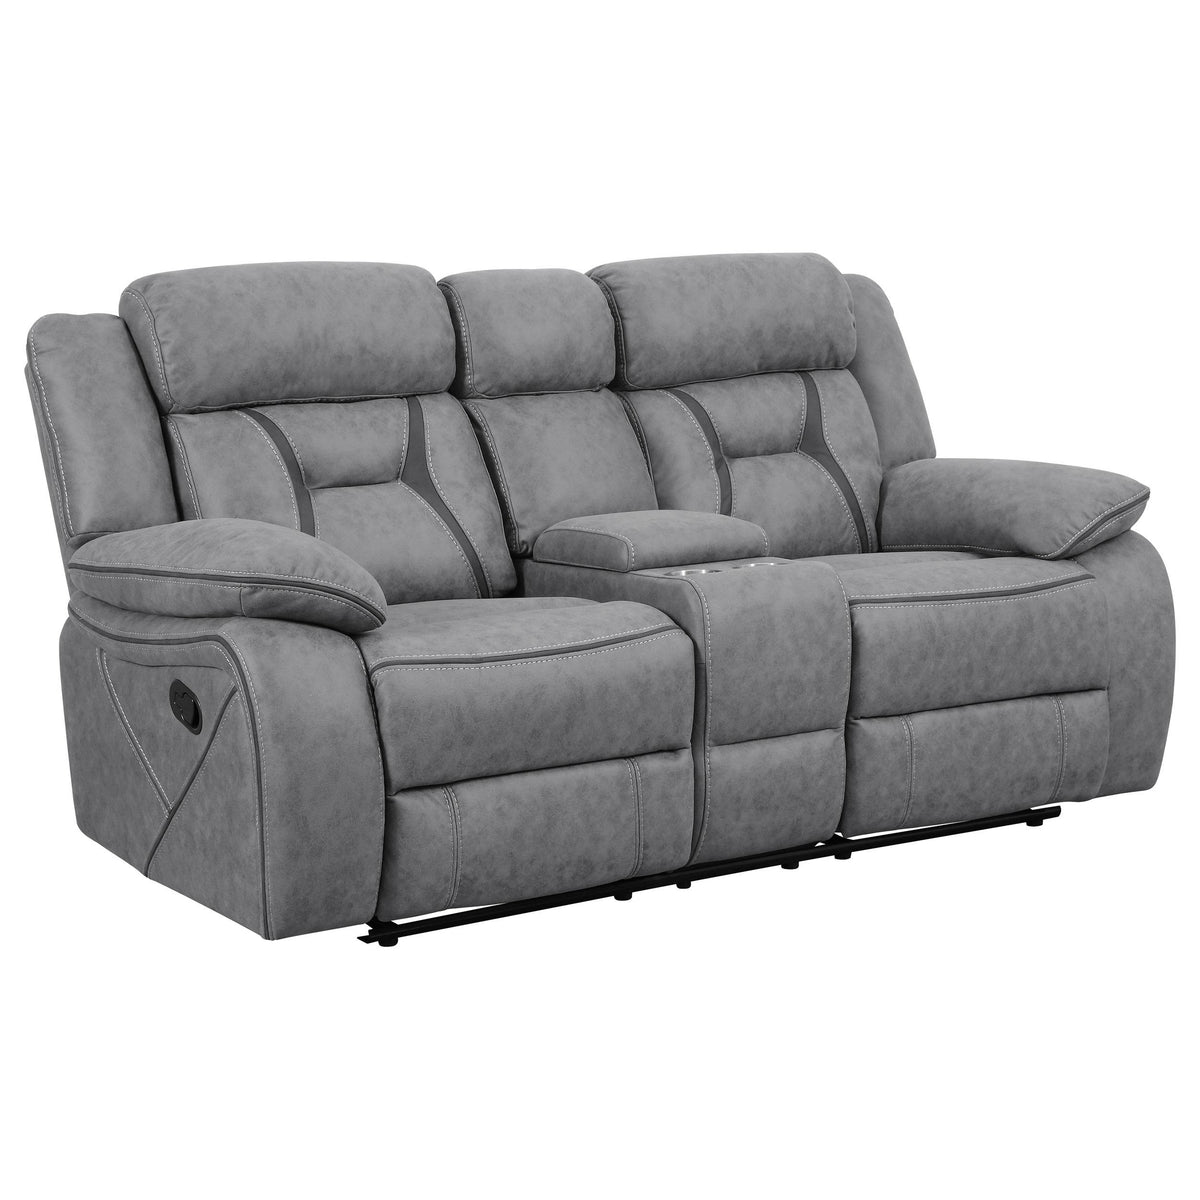 Higgins Pillow Top Arm Motion Loveseat with Console Grey  Half Price Furniture